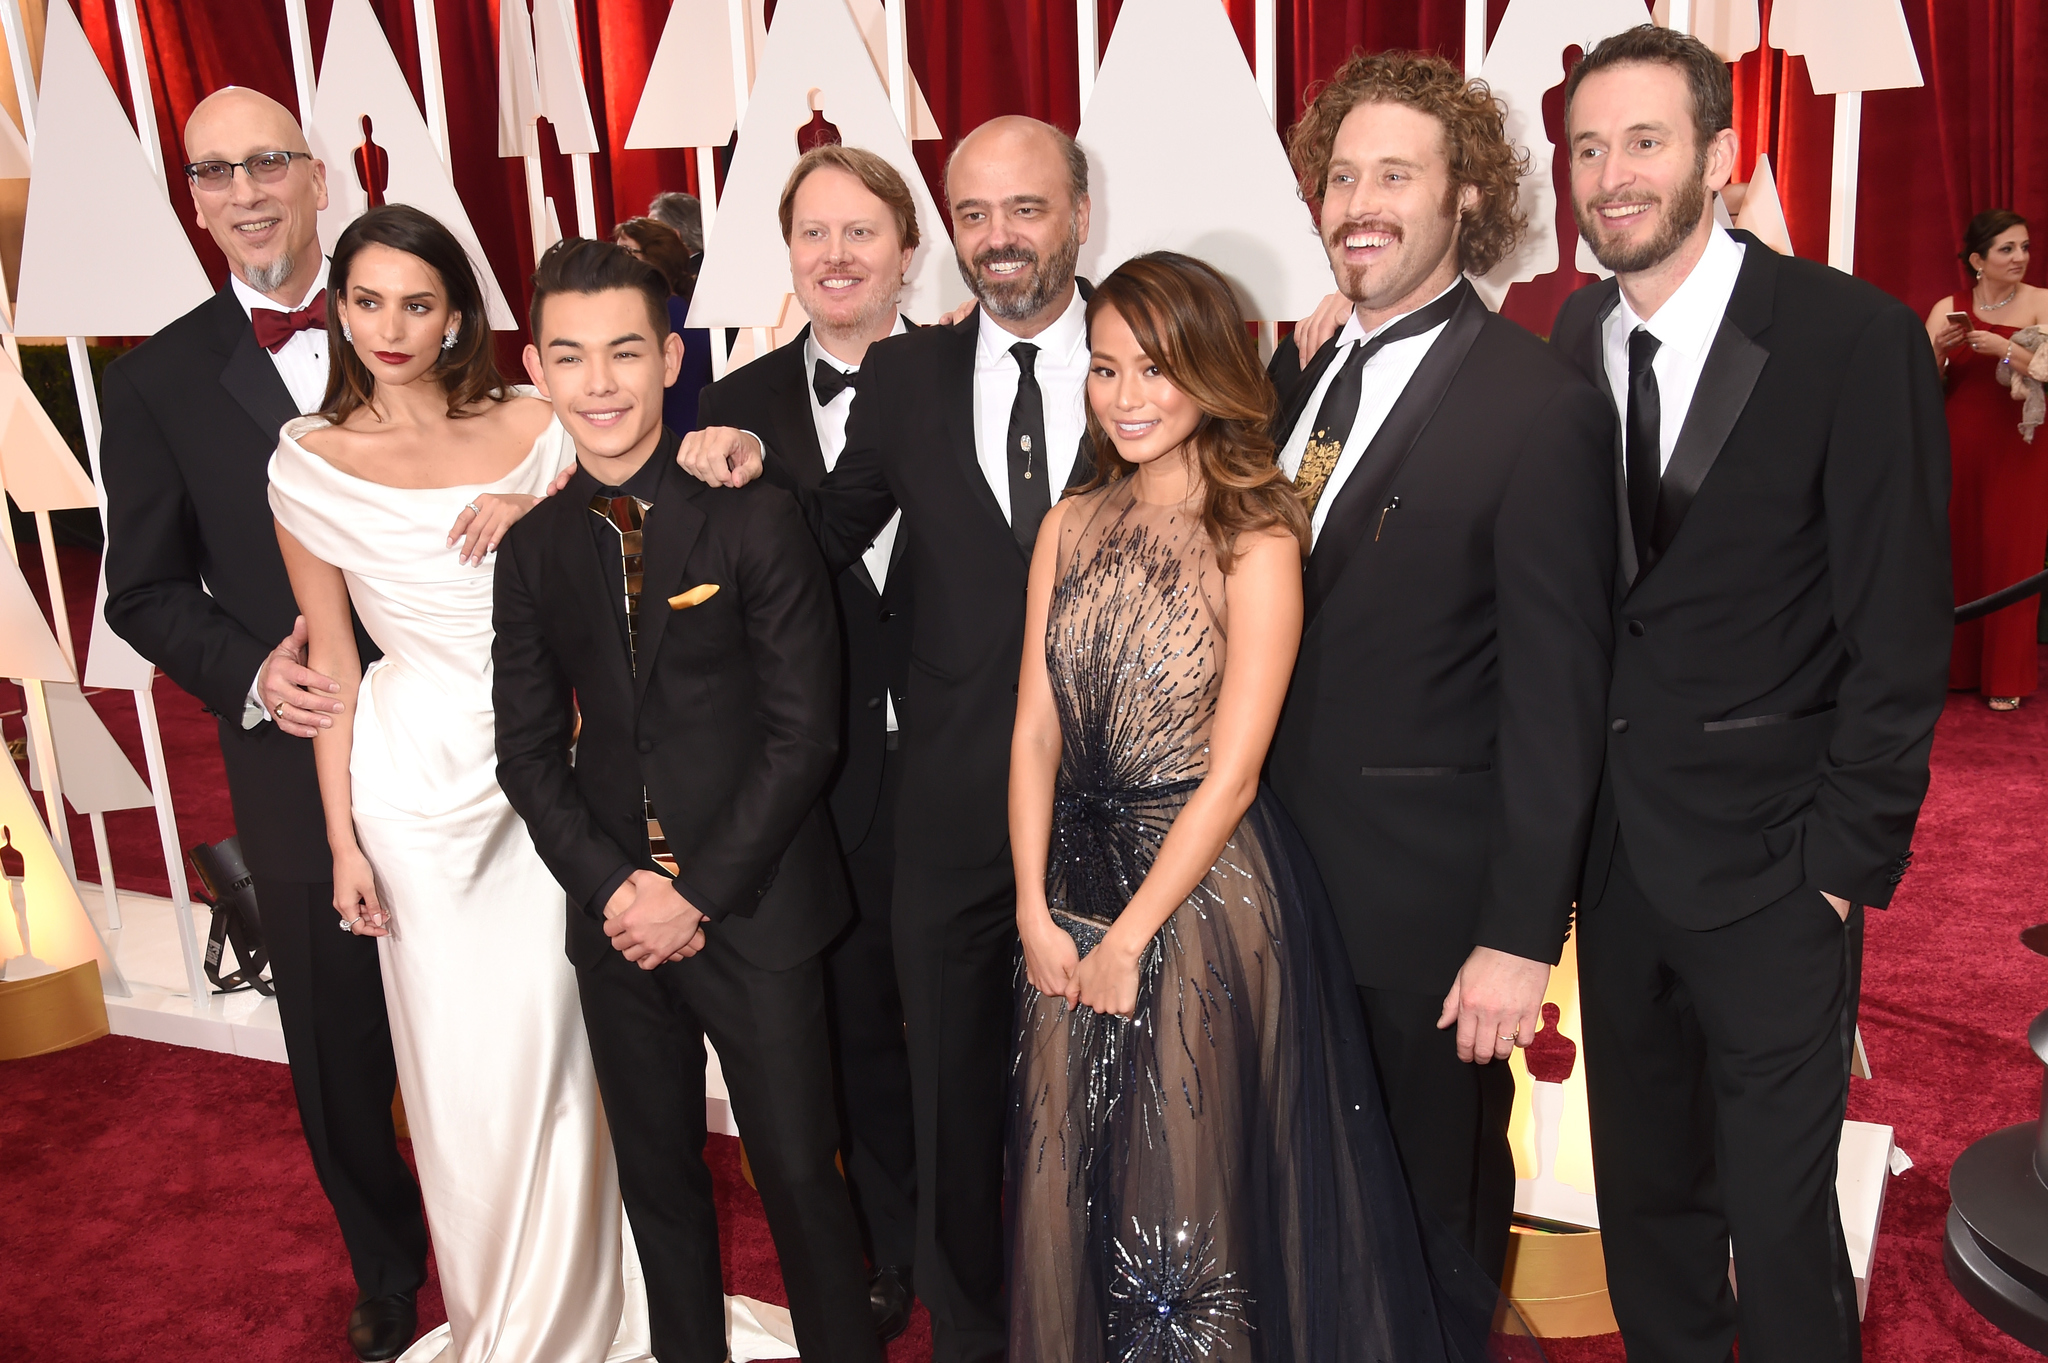 Scott Adsit, Roy Conli, Chris Williams, Genesis Rodriguez, Jamie Chung, Don Hall, T.J. Miller and Ryan Potter at event of The Oscars (2015)